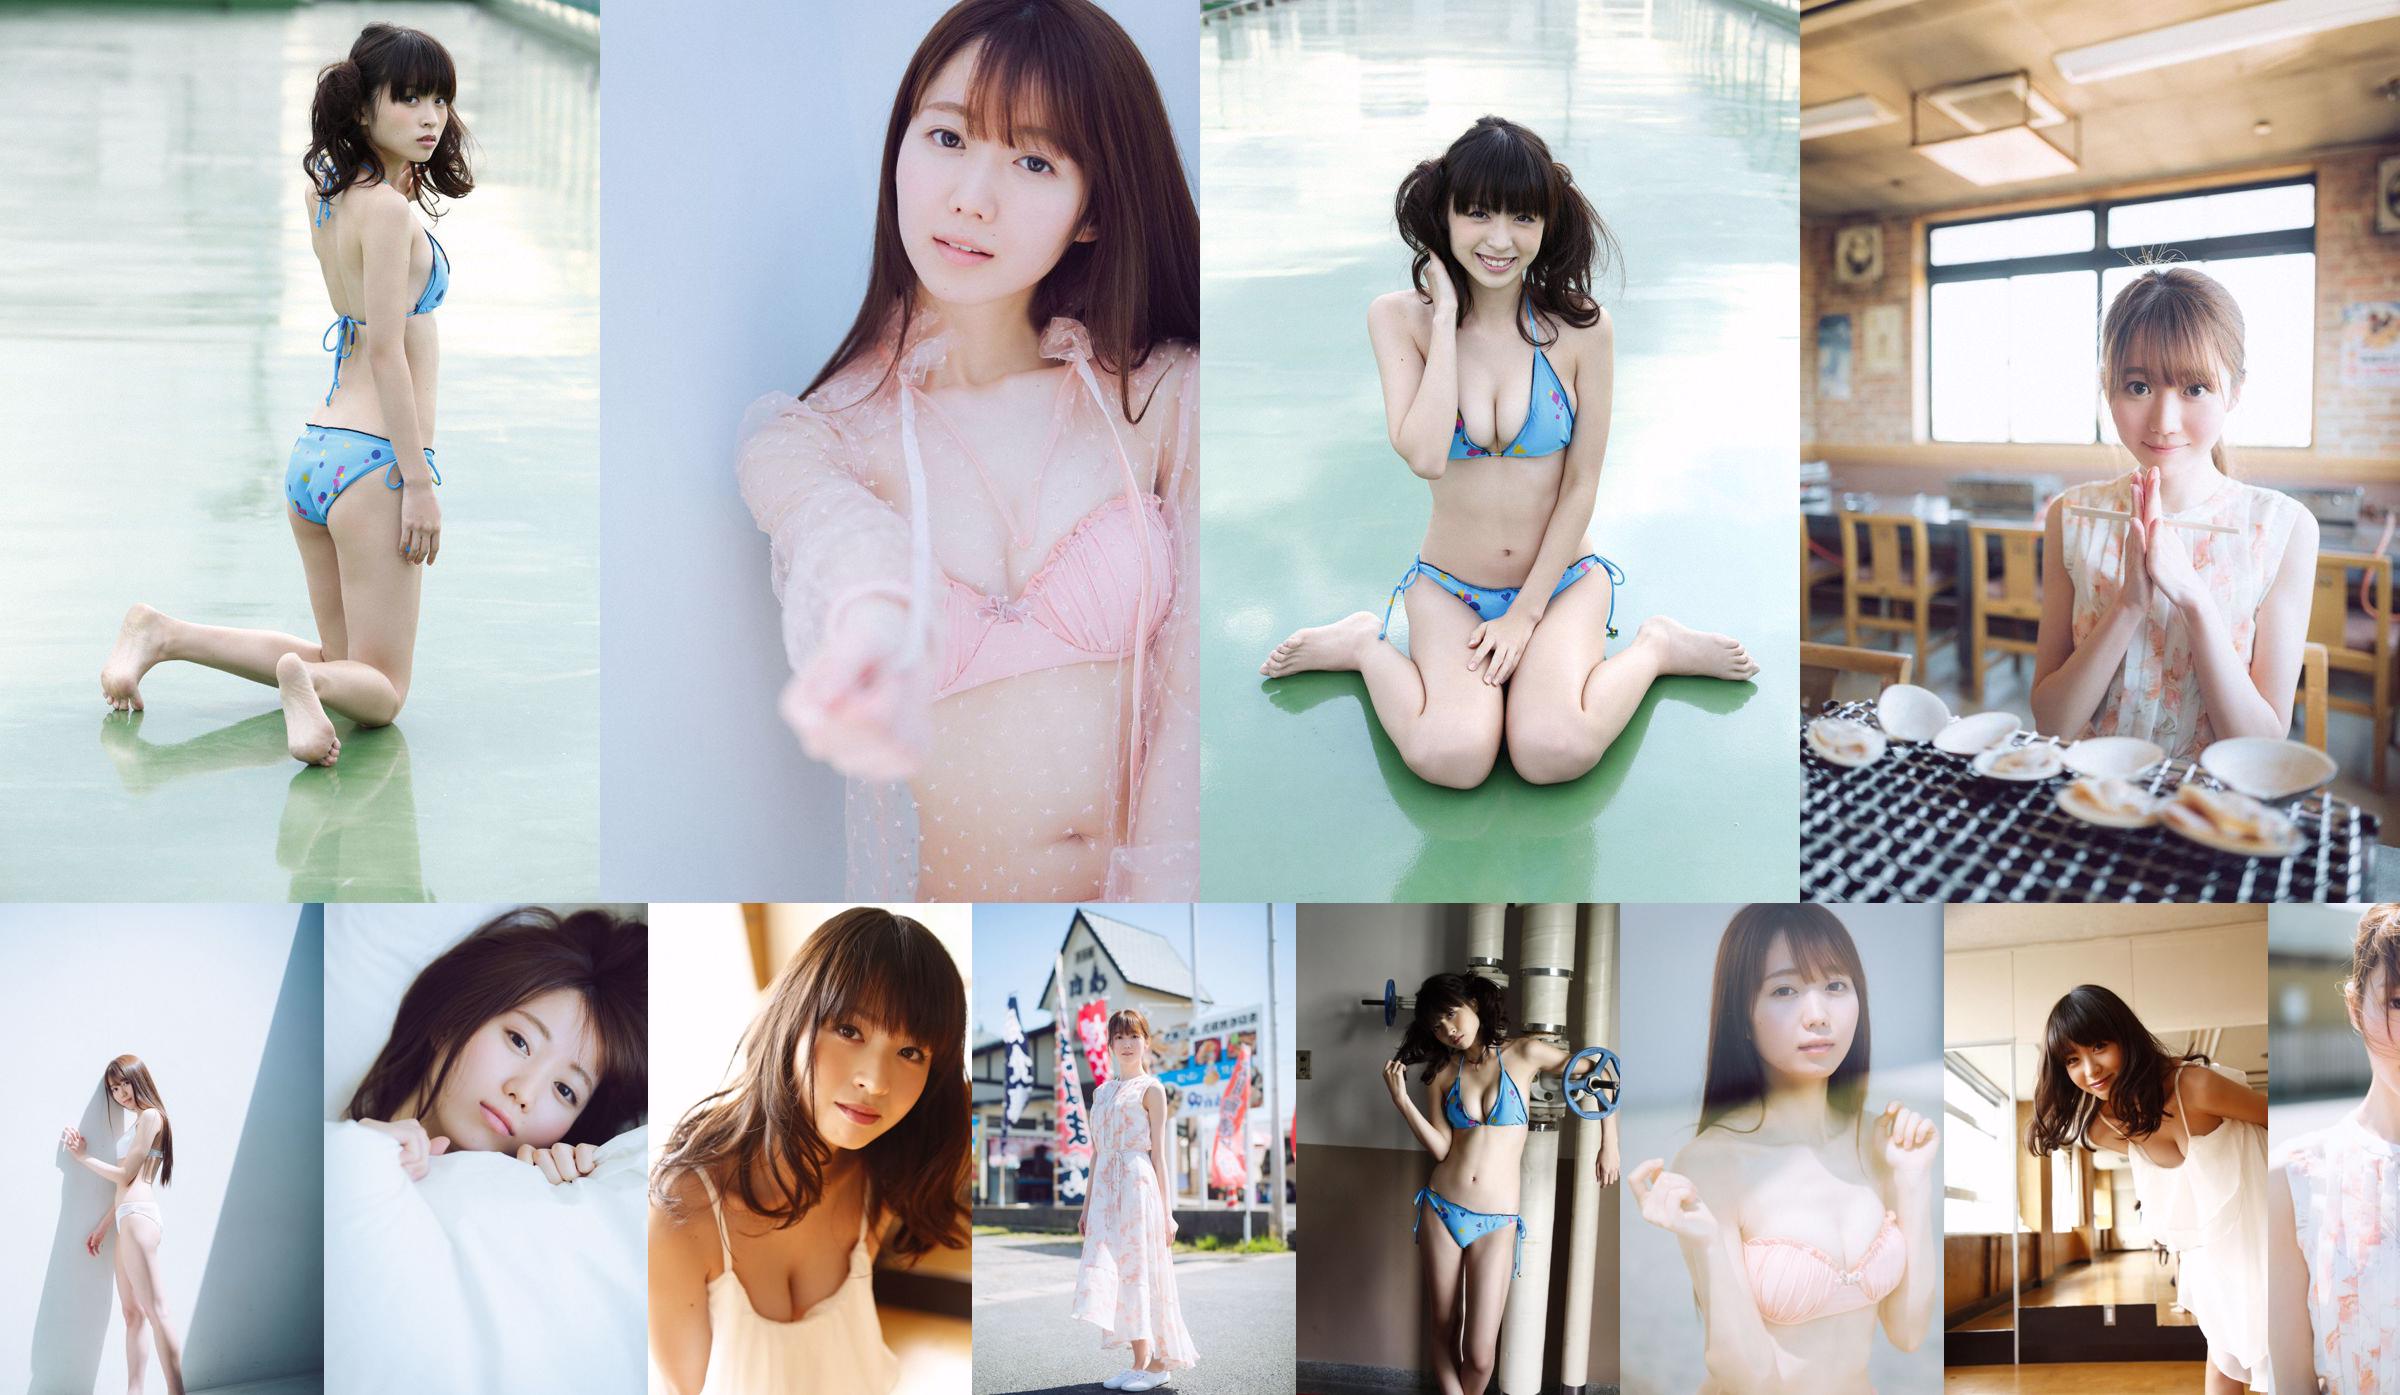 Emiri Otani "With you and two." [WPB-net] Extra734 No.b98a4f Page 4